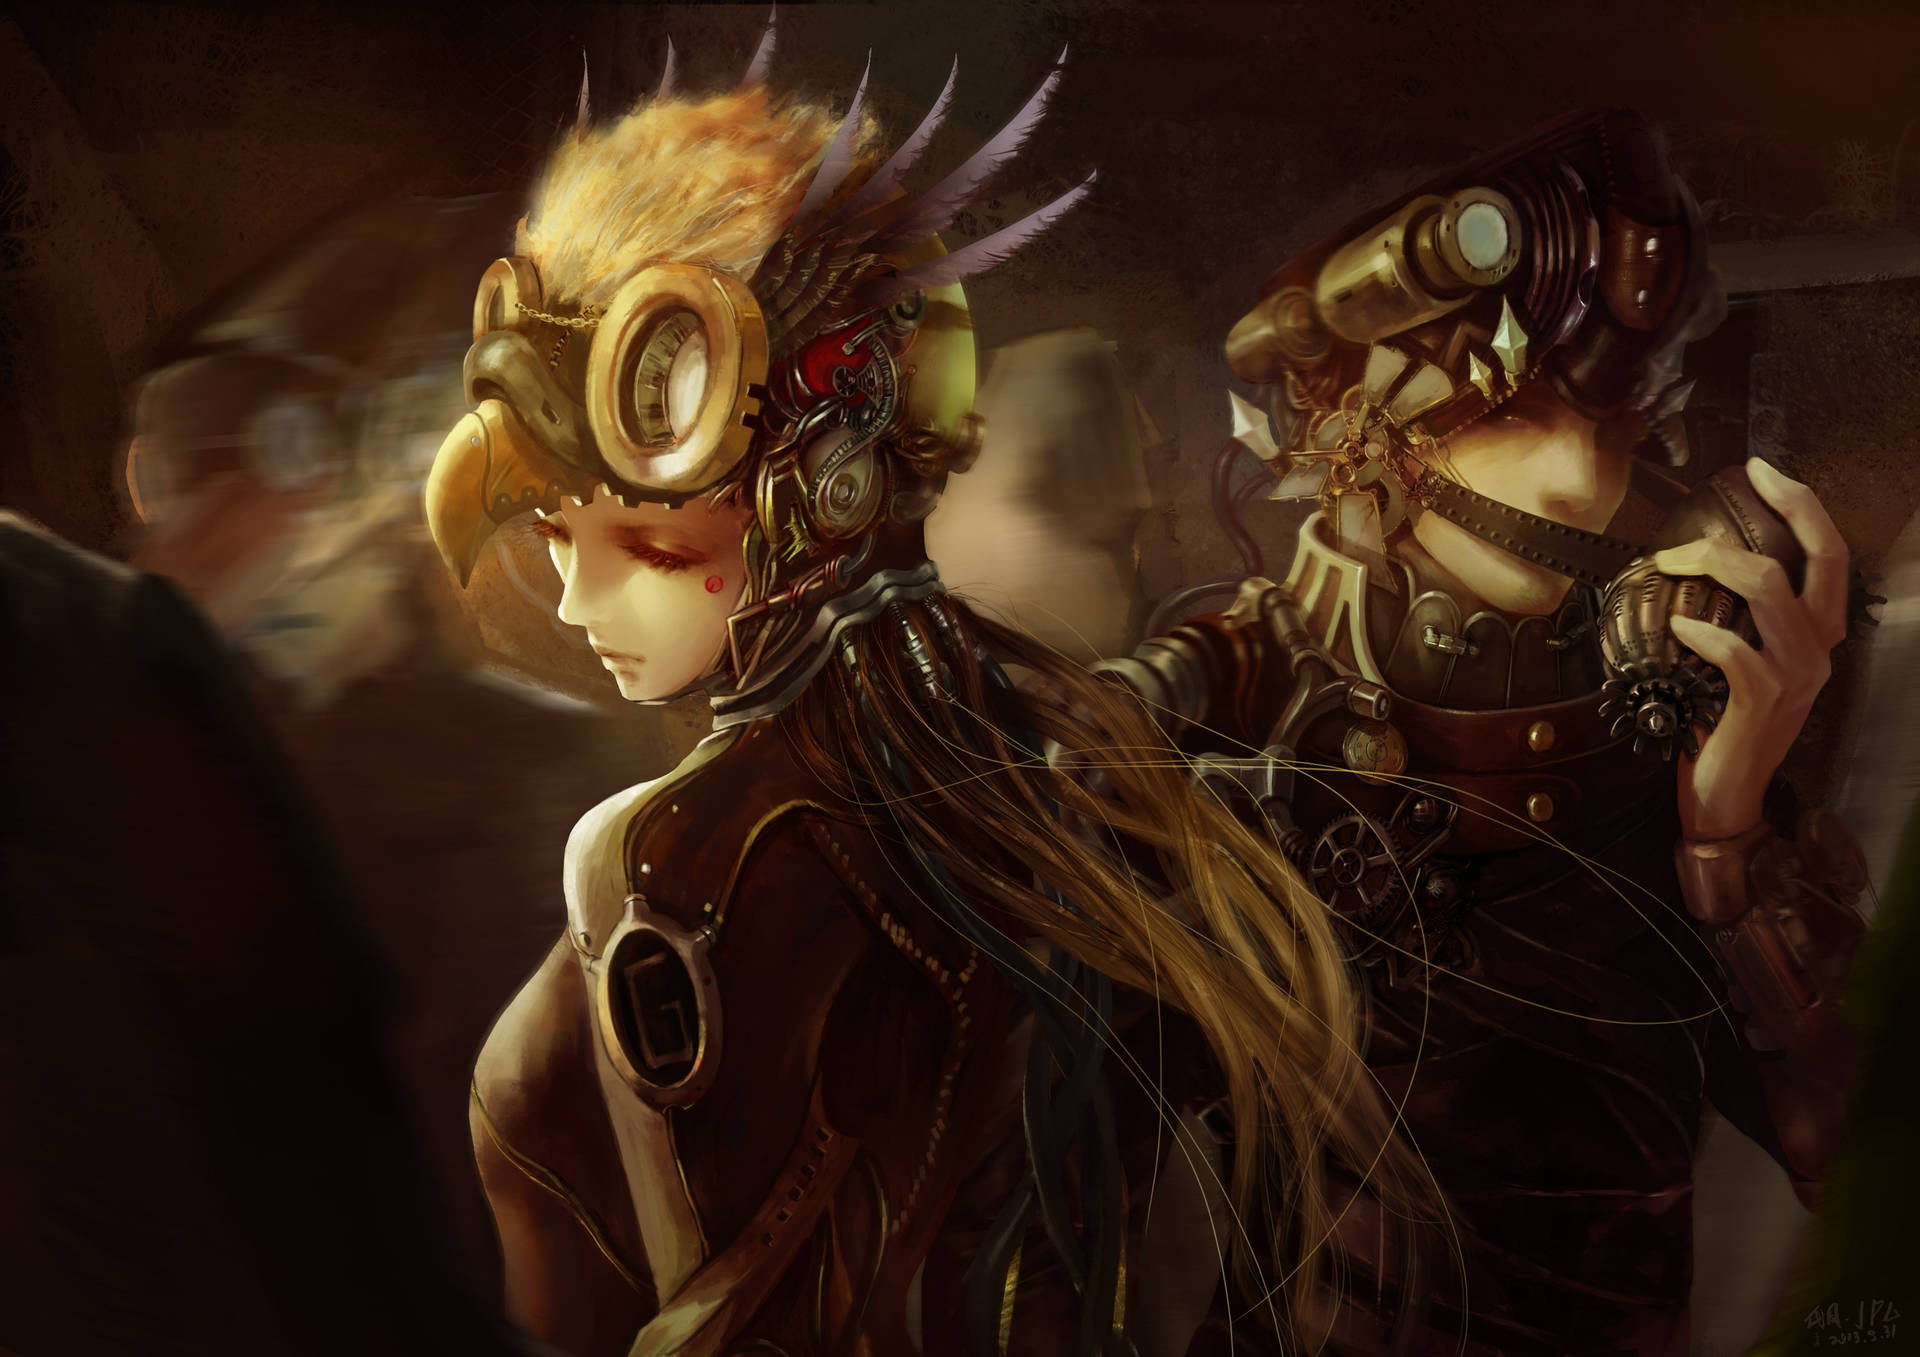 A Steampunk Couple in the City Wallpaper